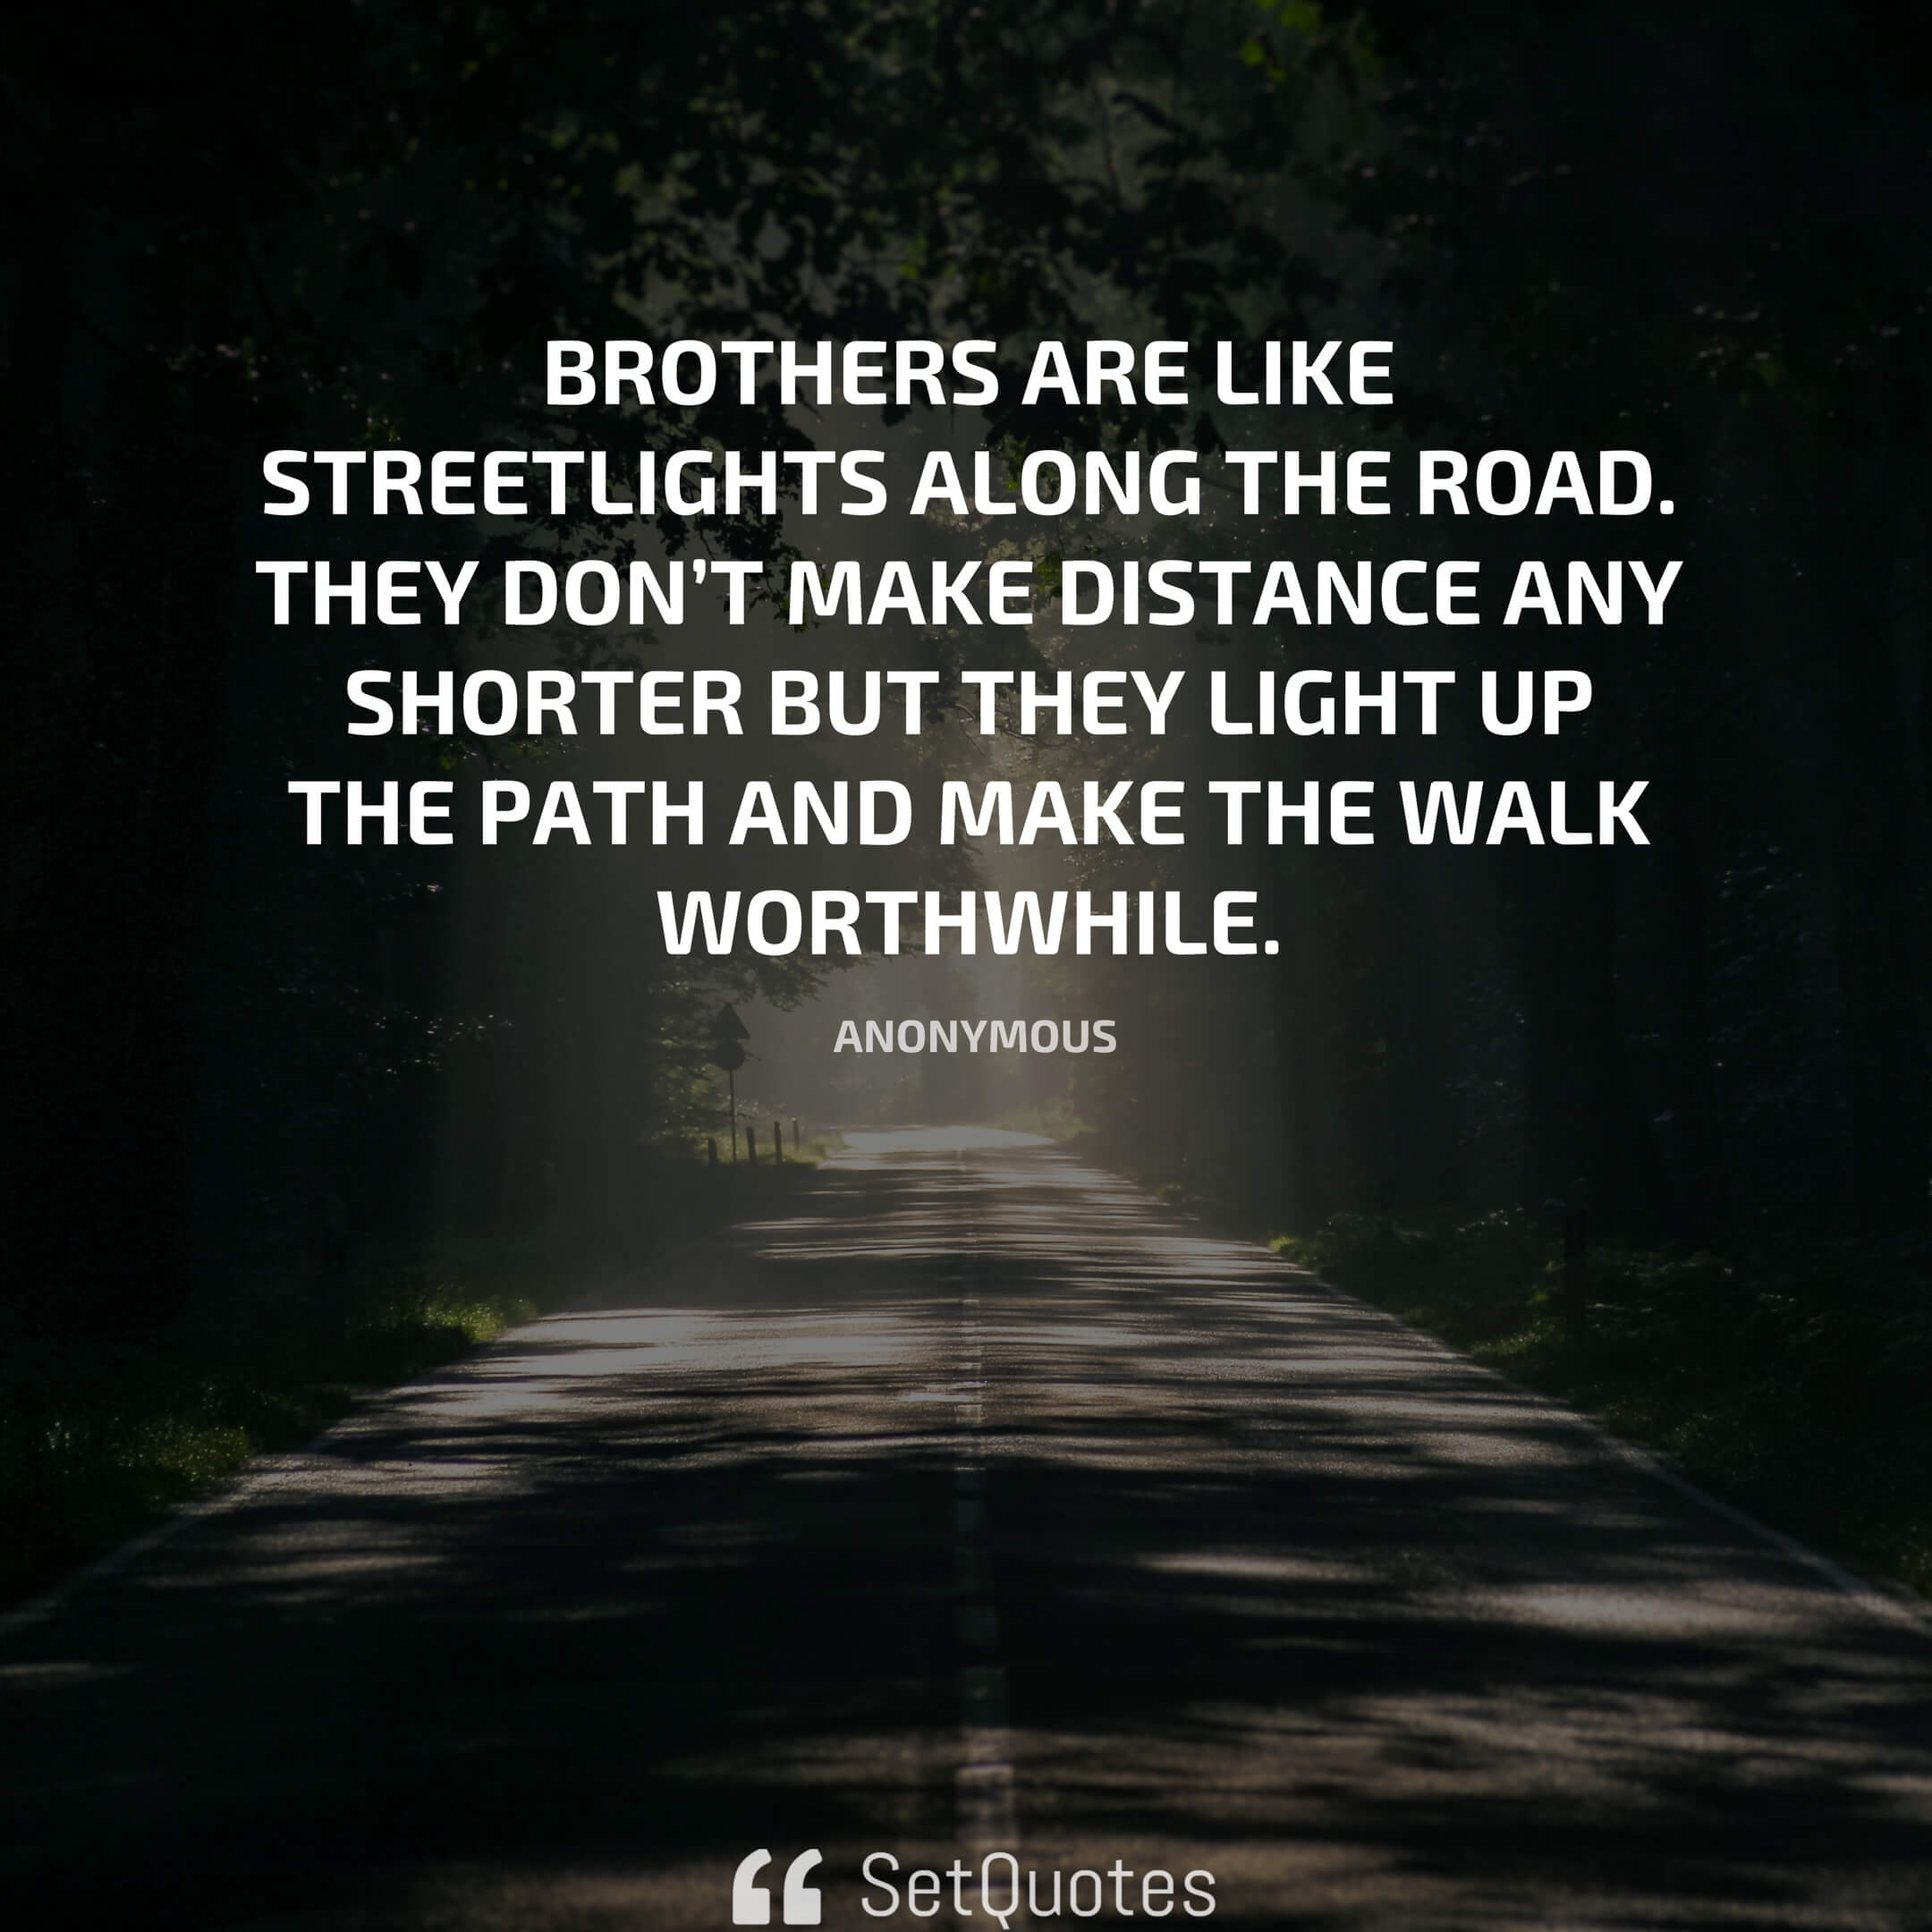 Brothers are like streetlights along the road. They don’t make distance any shorter but they light up the path and make the walk worthwhile.